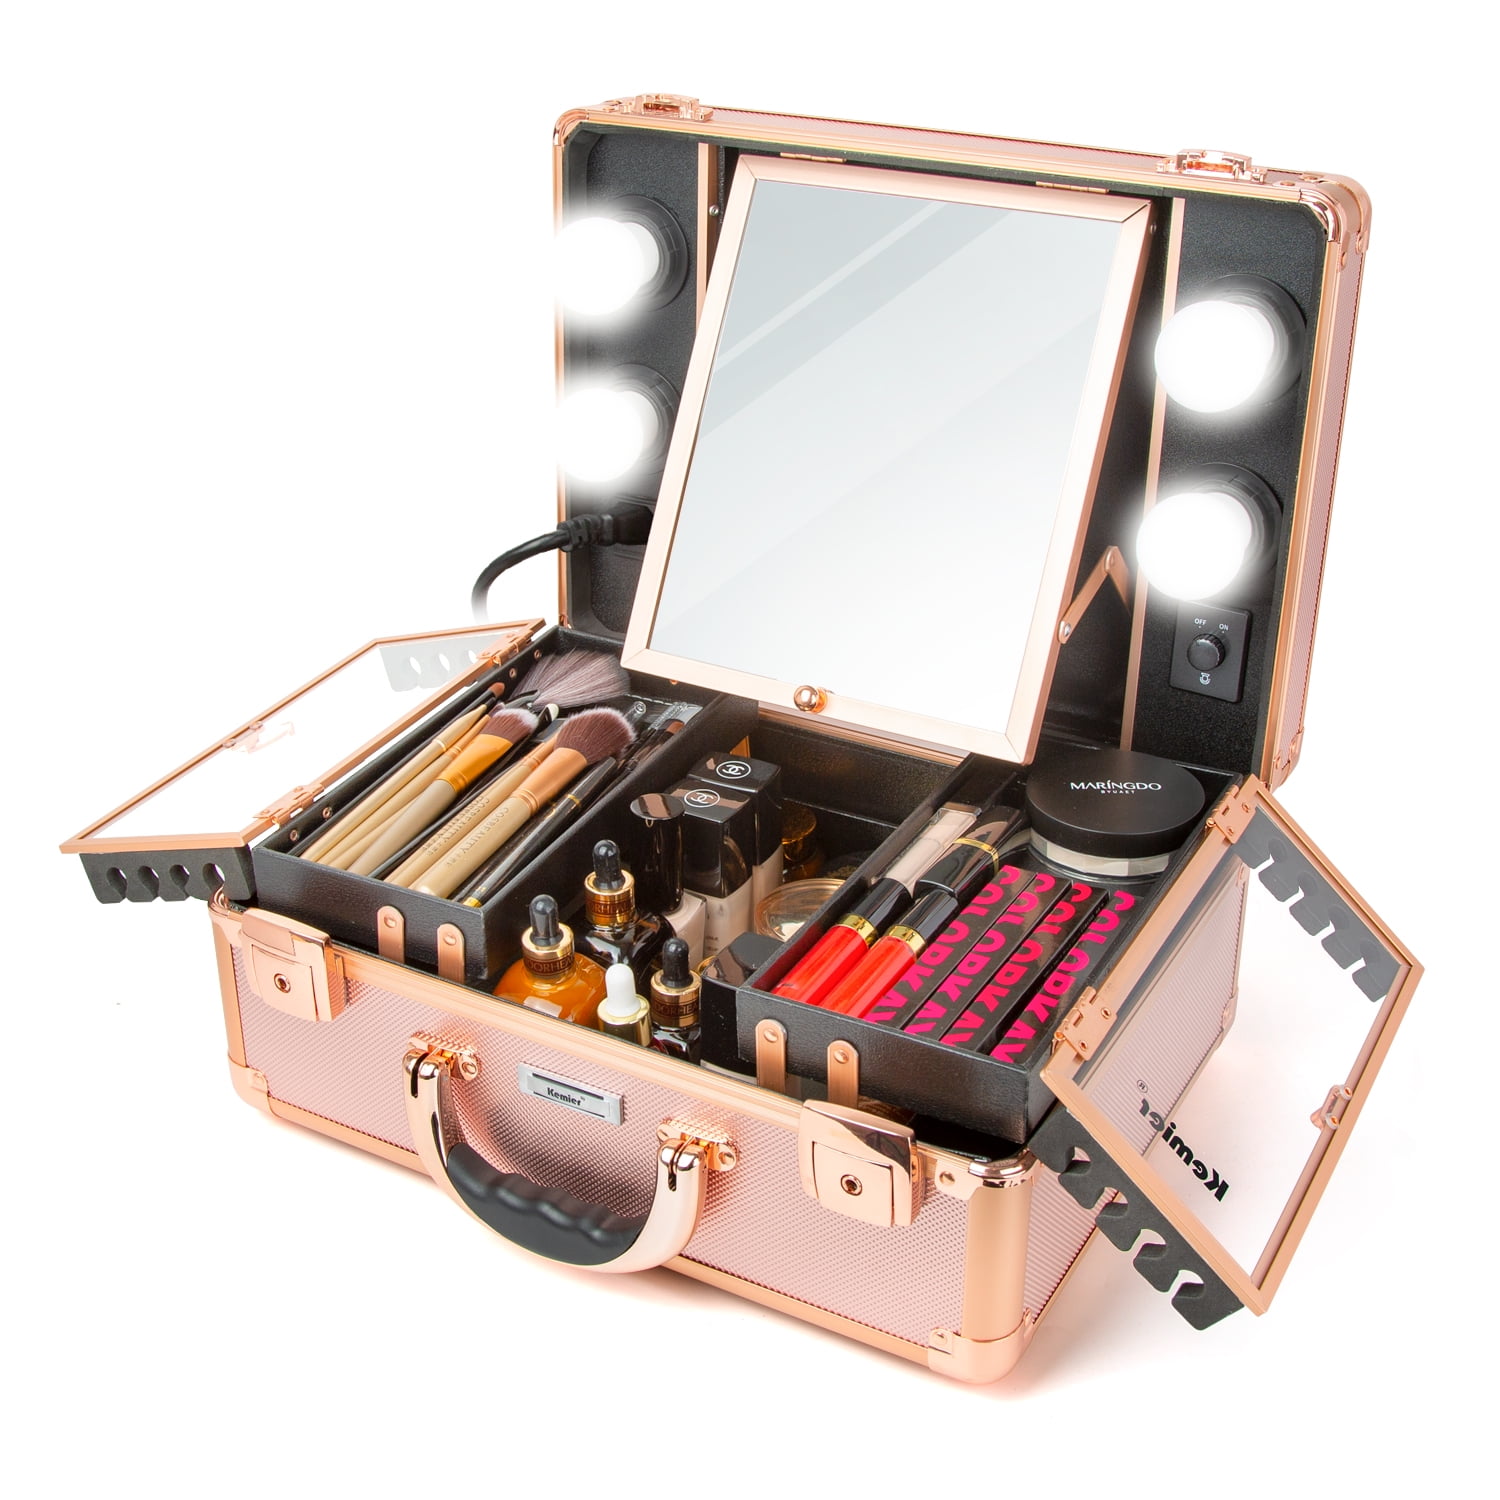 Kemier Makeup Train Case - Cosmetic Organizer Box Makeup Case with Lights  and Mirror / Makeup Case with Customized Dividers / Large Makeup Artist